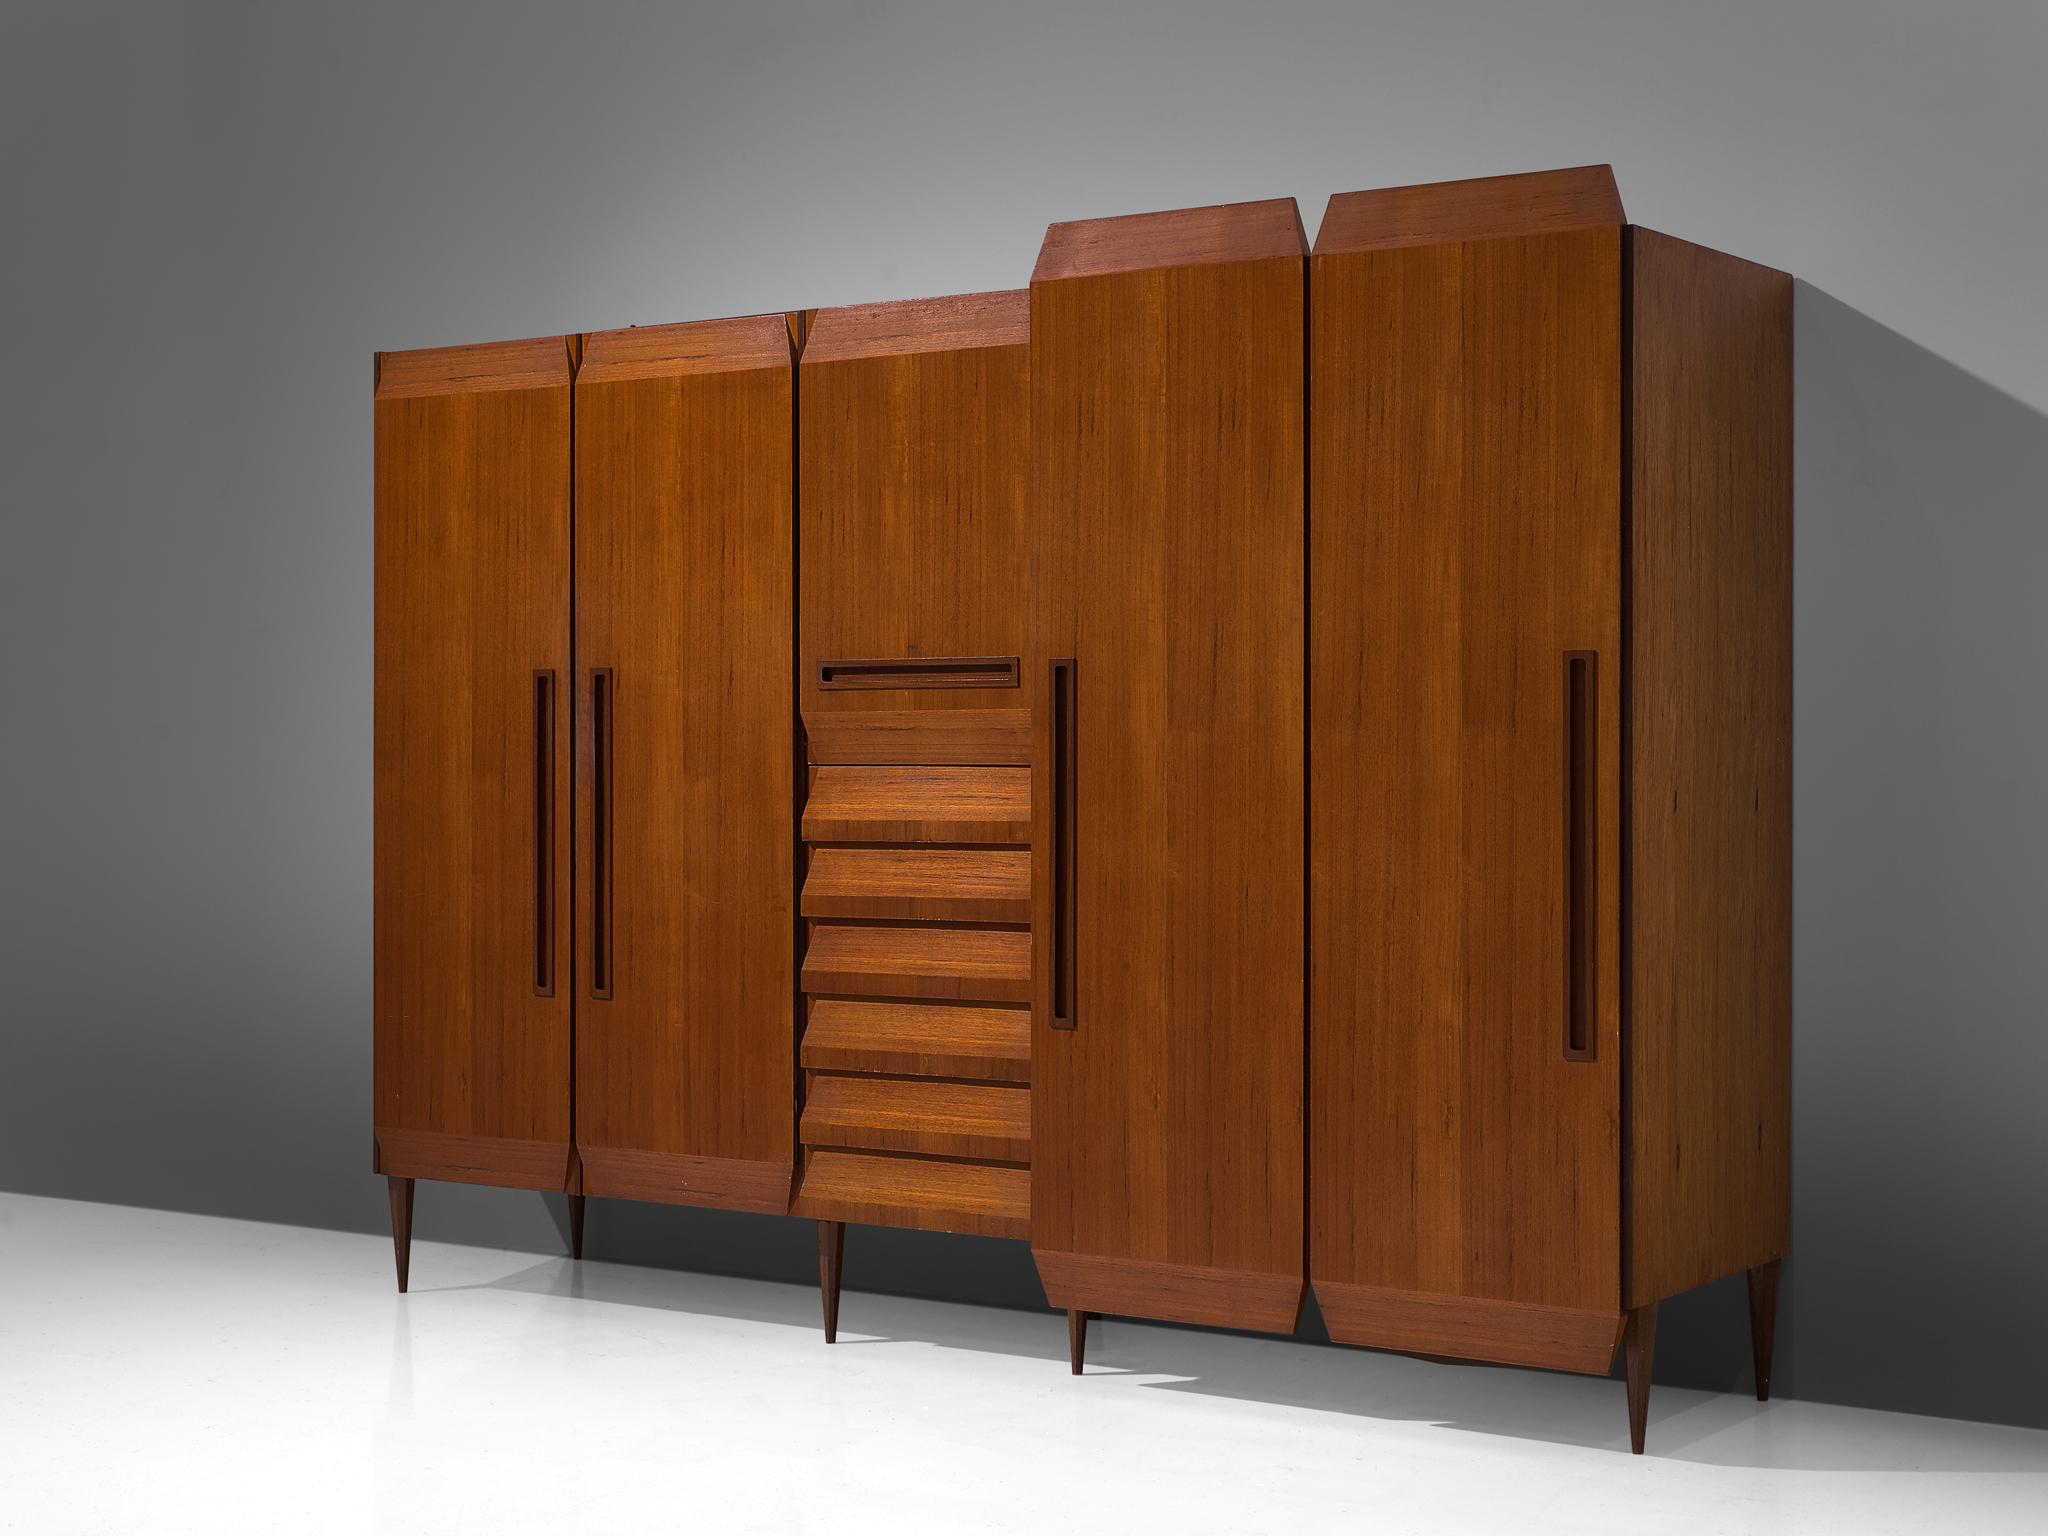 Wardrobe, teak, Italy, 1960s

Italian wardrobe executed in teak. Four doors and a colum with drawers structure this wardrobe which features two levels as two outer doors are deeper and higher than the rest of the wardrobe. The appearance is unique